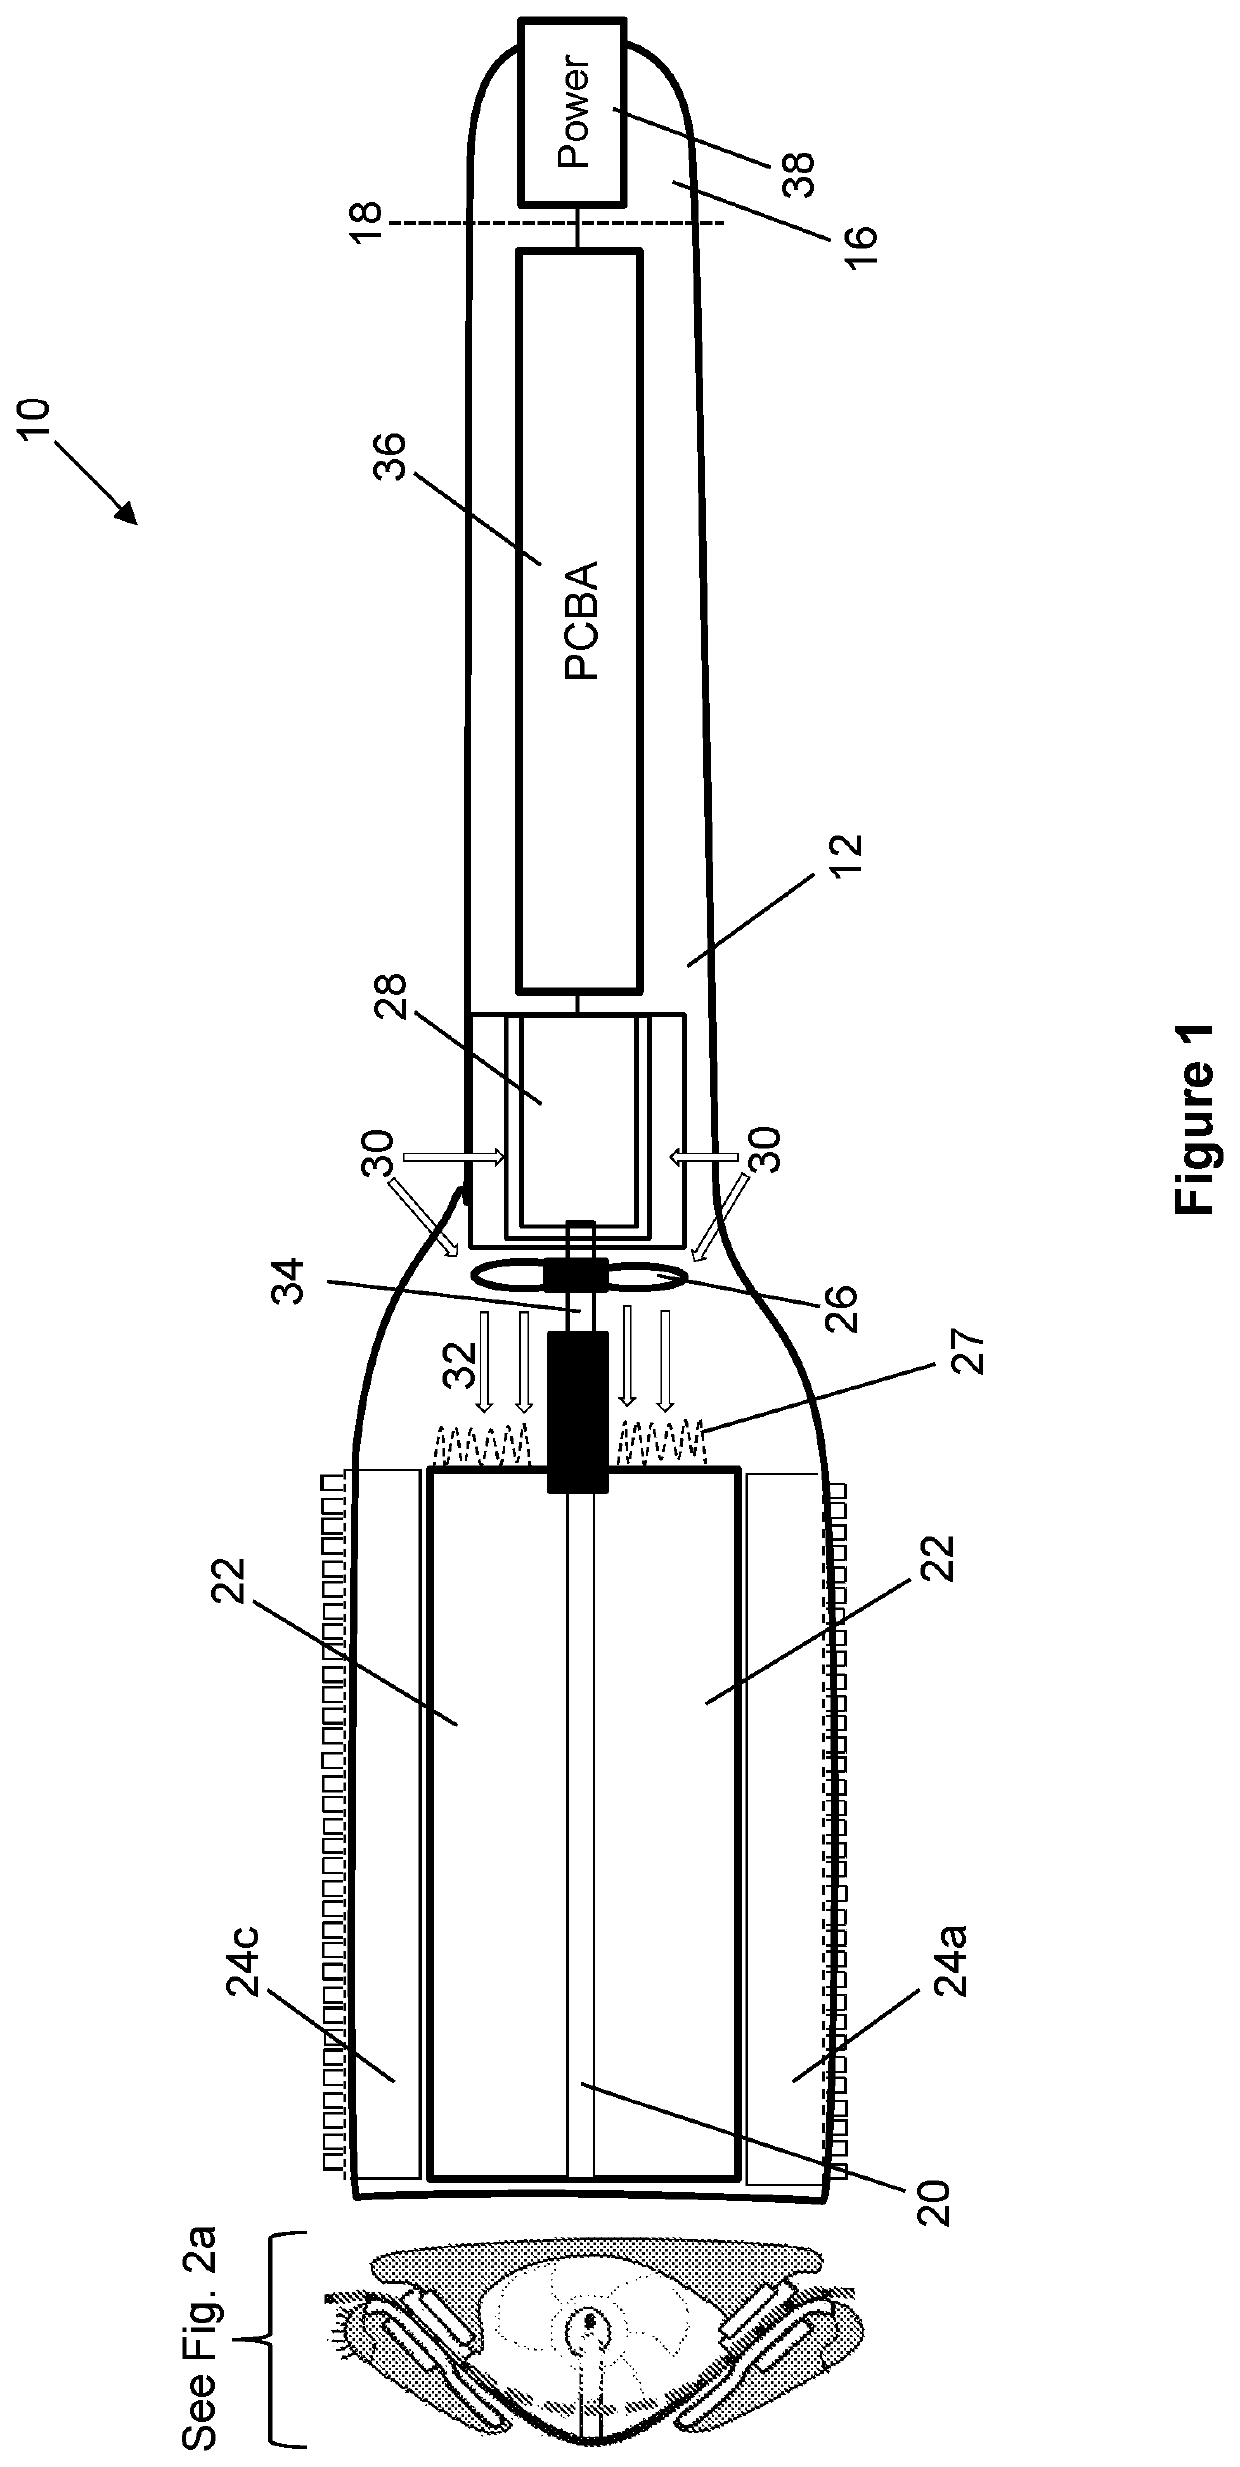 Apparatus and method for drying hair